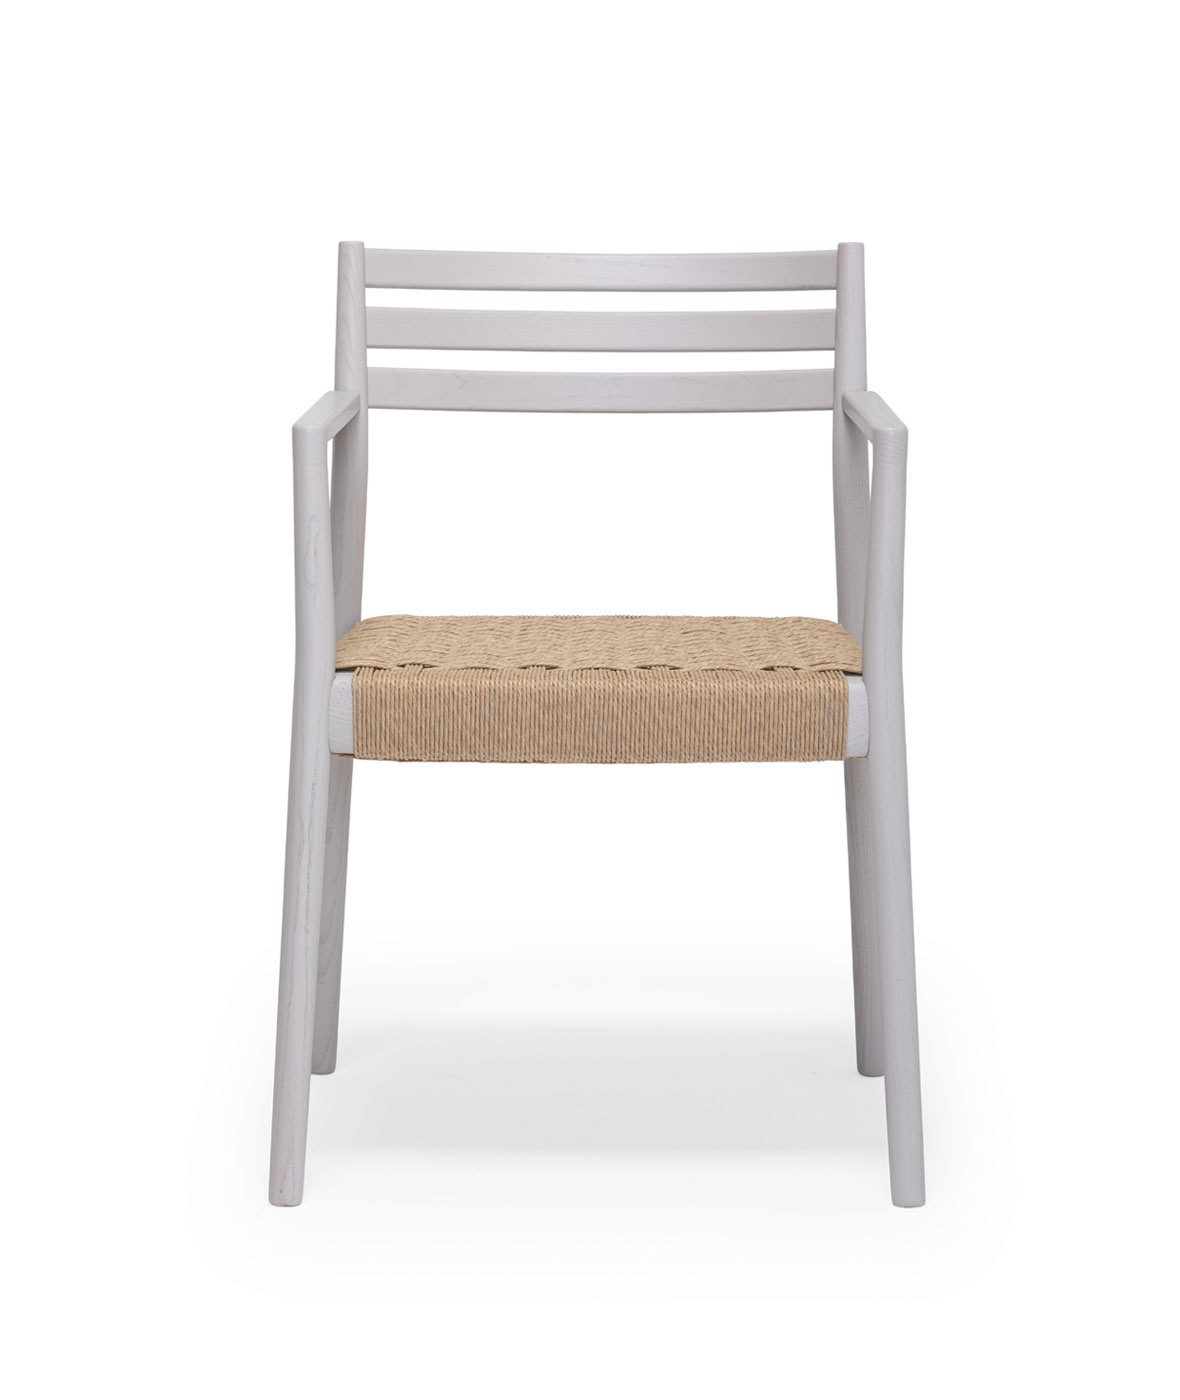 Bogart chair with armrests and braided rope seat - Vergés